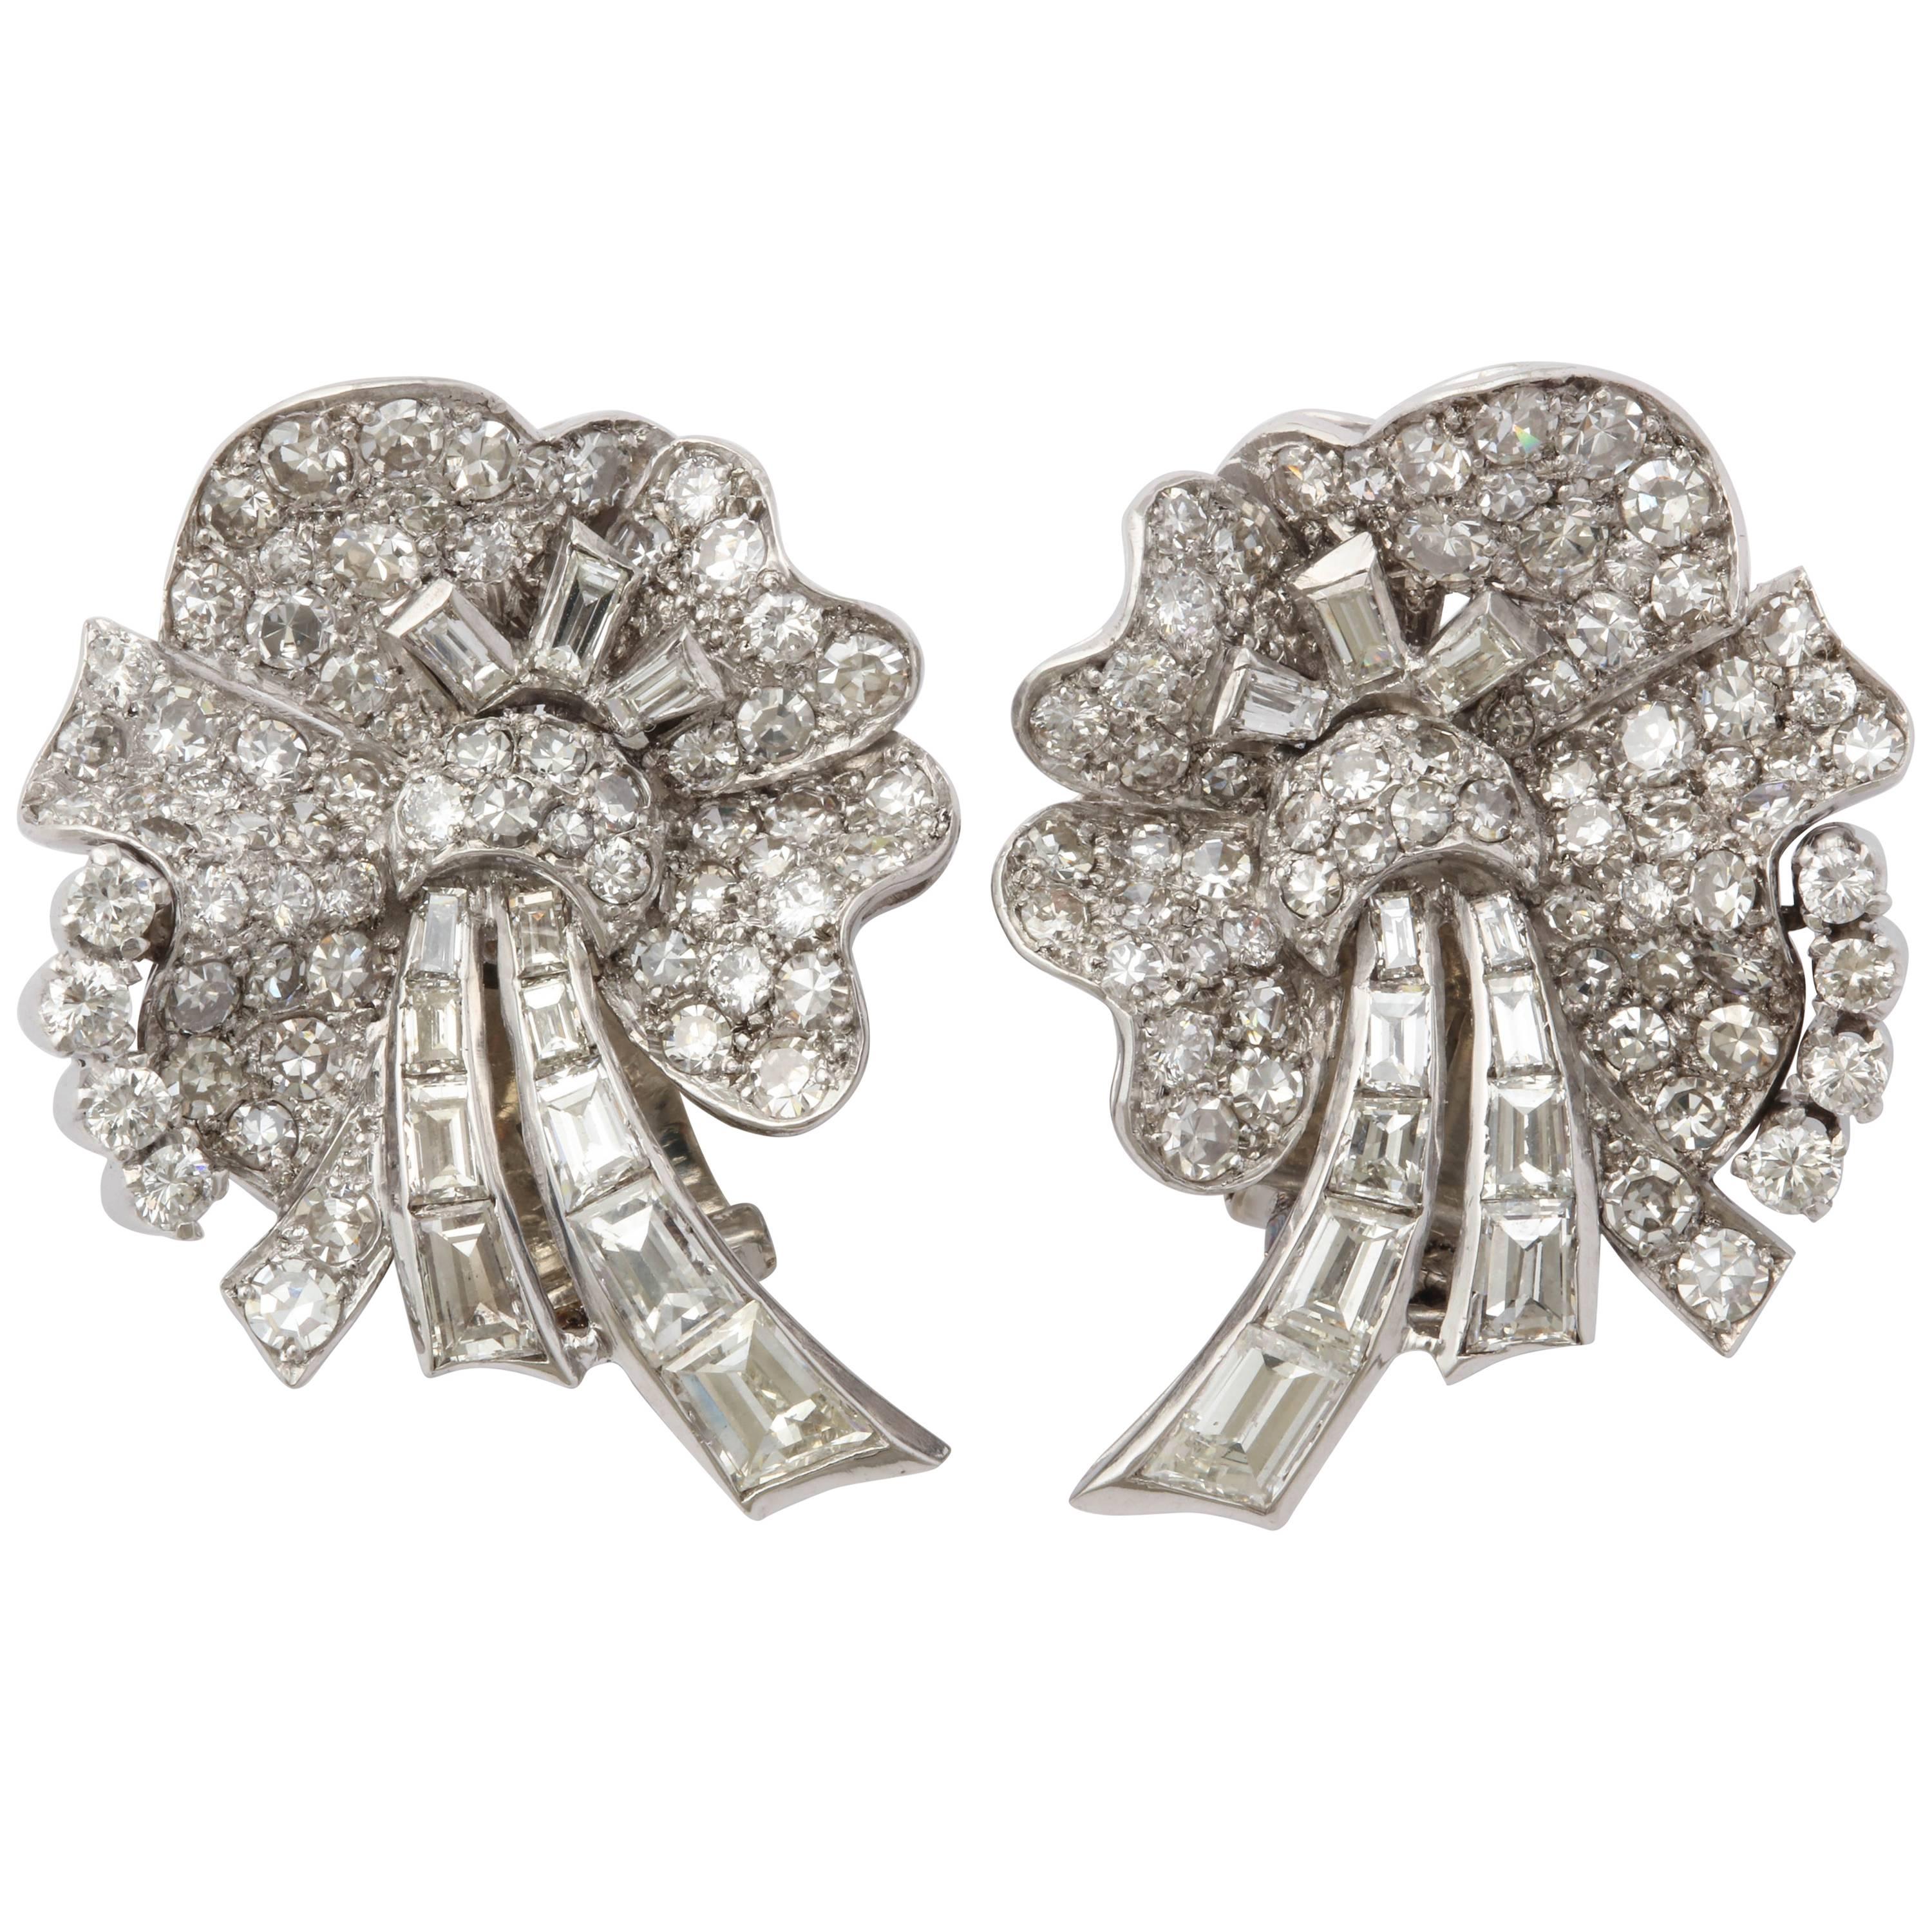 1950s Elegant Figural Pansy Floral Diamond with Baguettes Platinum Earclips